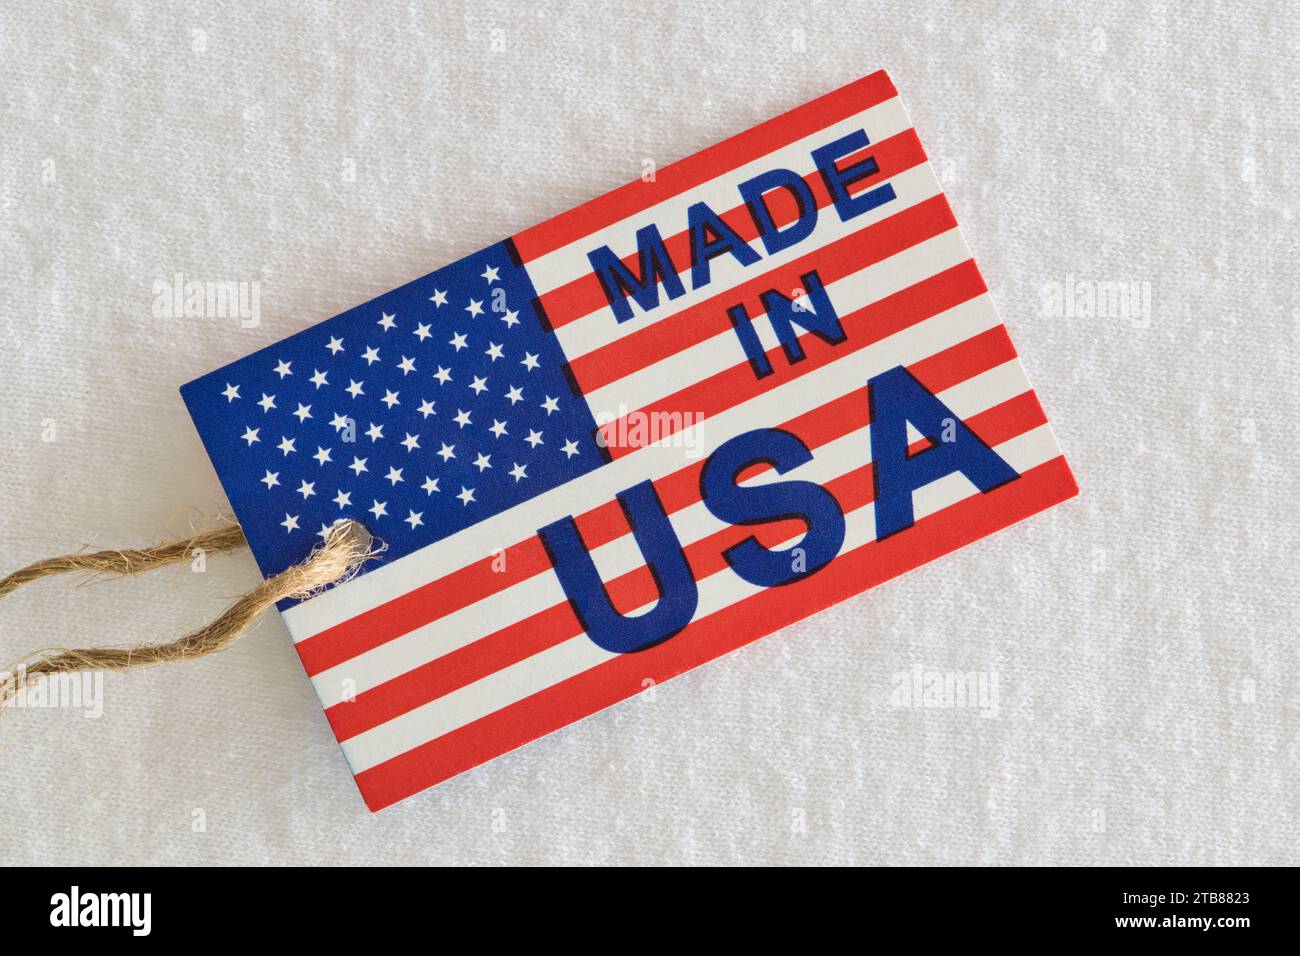 Made in USA label sitting on top of white clothing as a business economics concept. Flat lay macro image with patriotic background details. Stock Photo